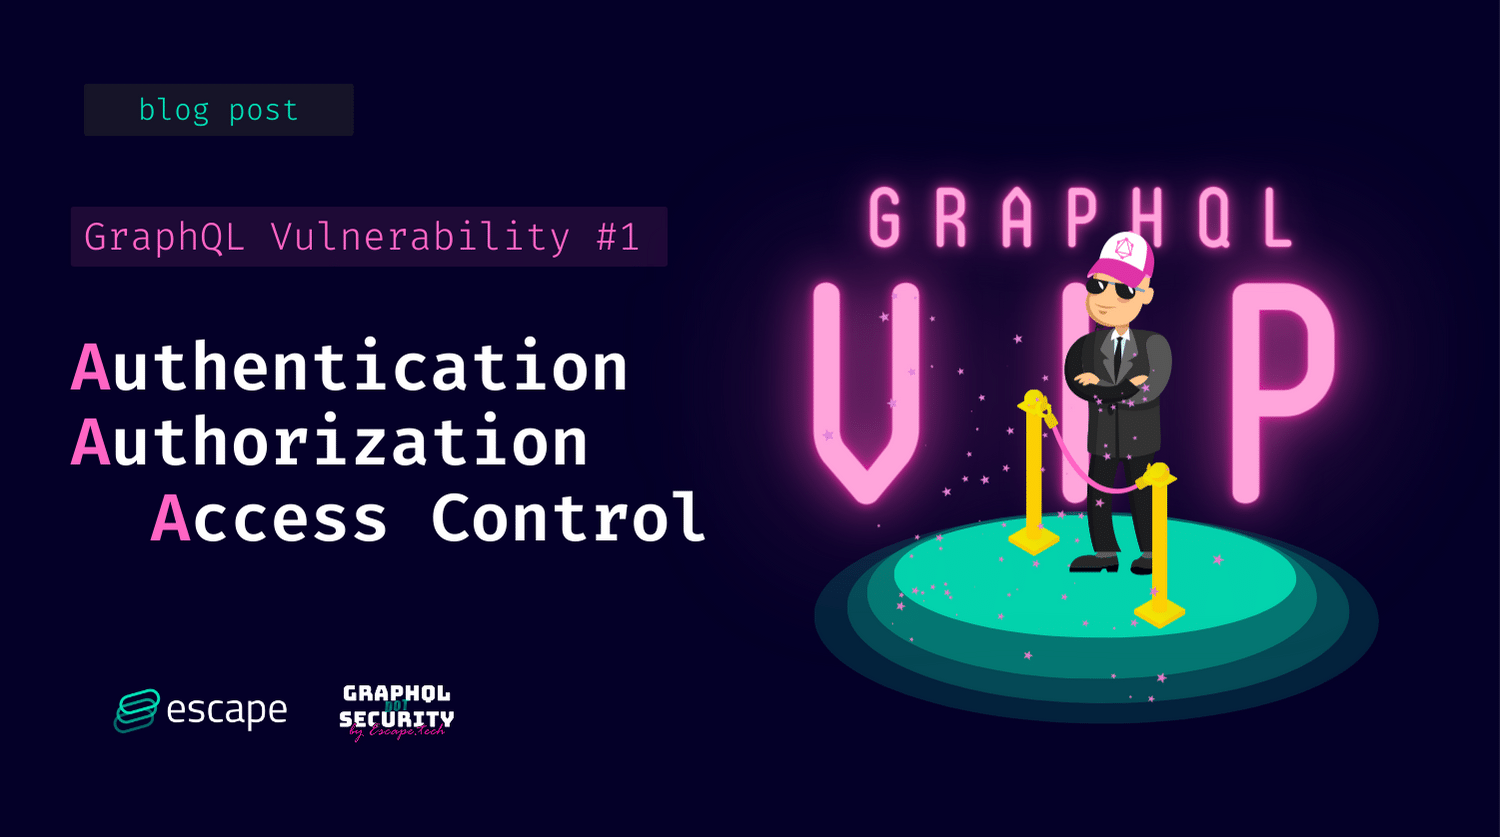 Access Control Best Practices for GraphQL with Authentication and Authorization